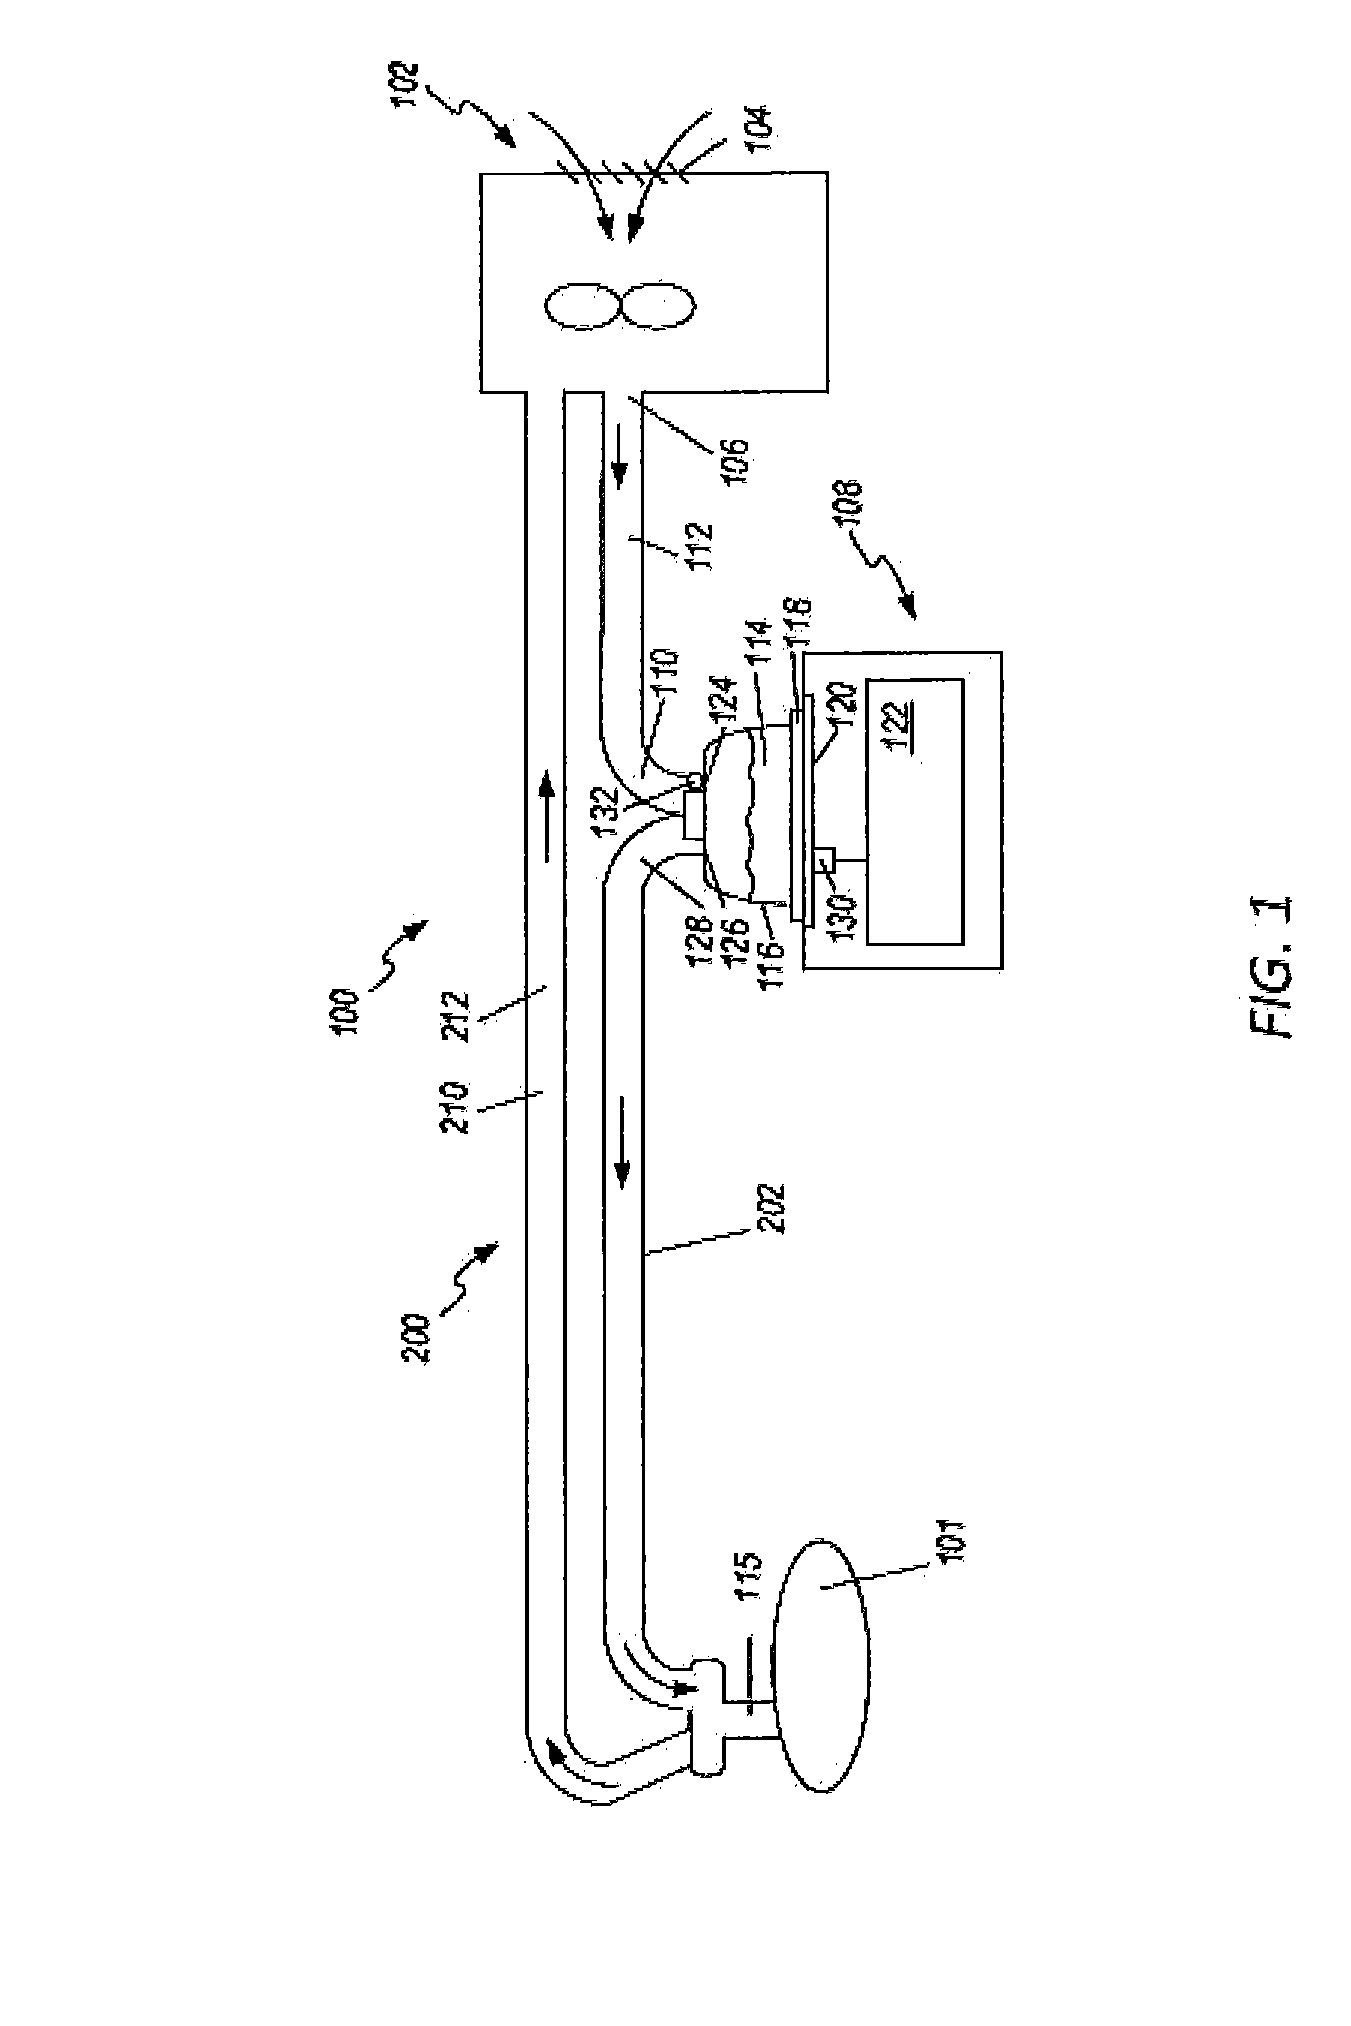 Drying expiratory limb with tailored temperature profile and multi-lumen configuration